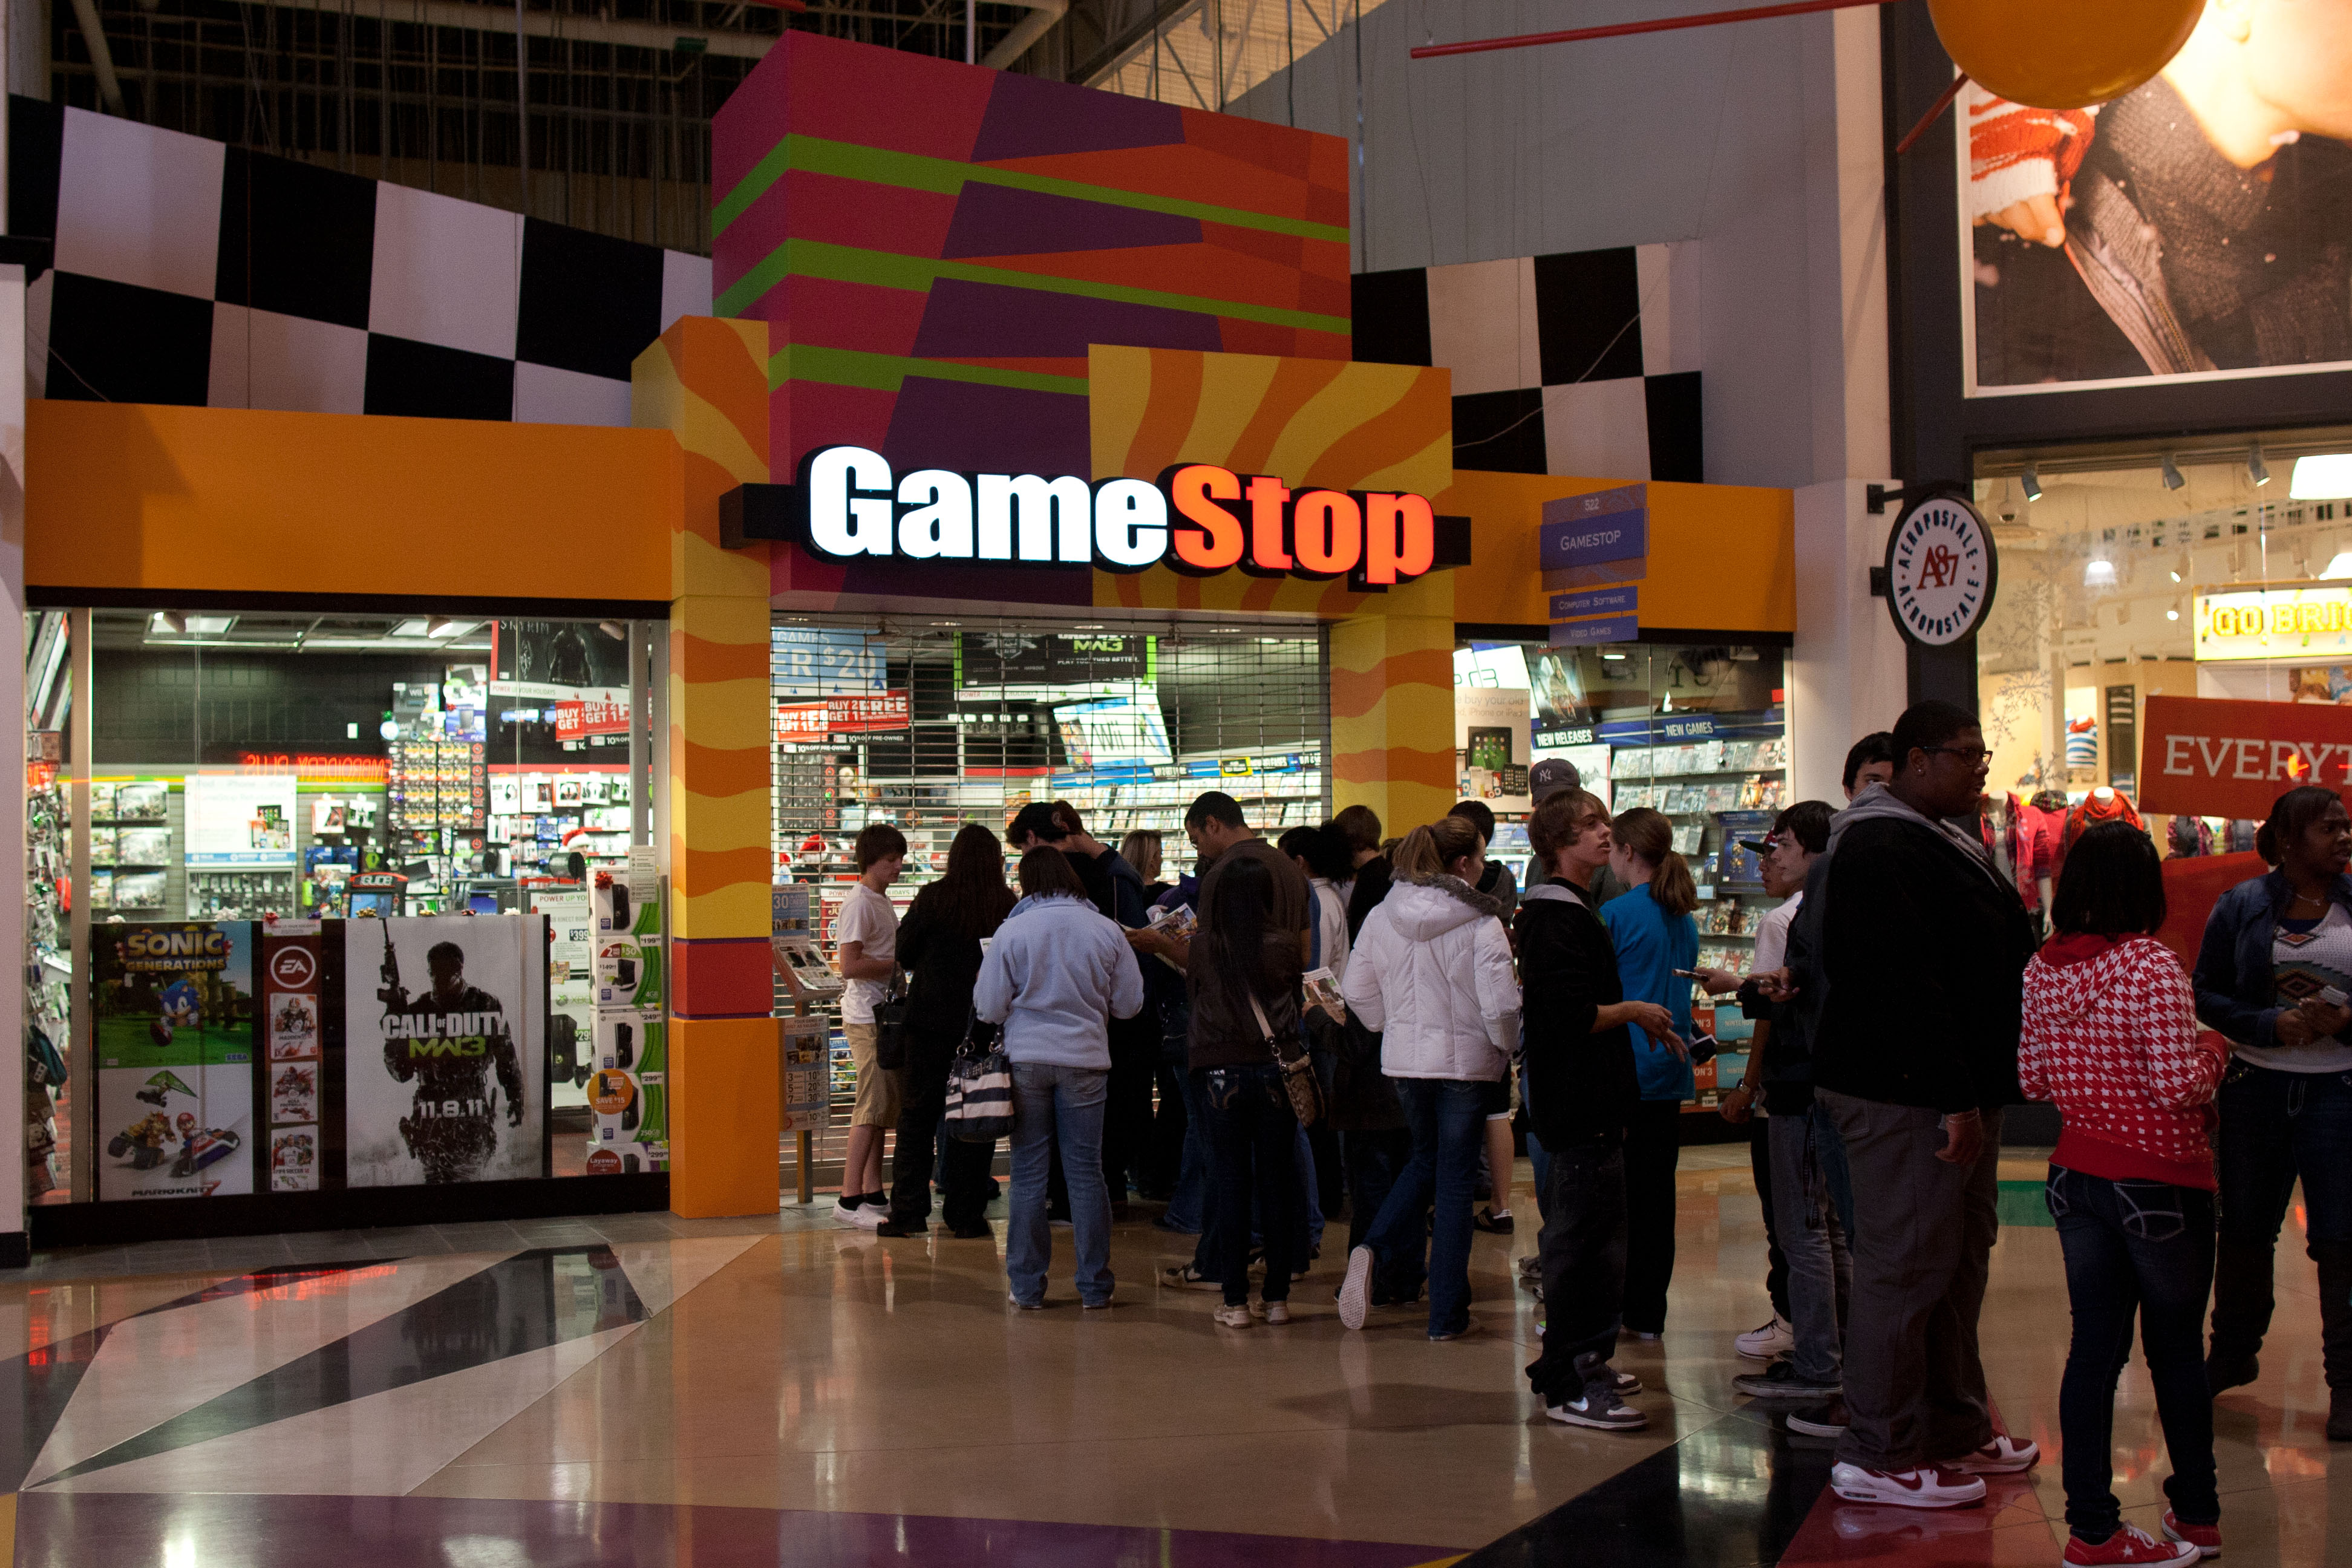 Here's a what to expect from the GameStop Black Friday 2014 ad.